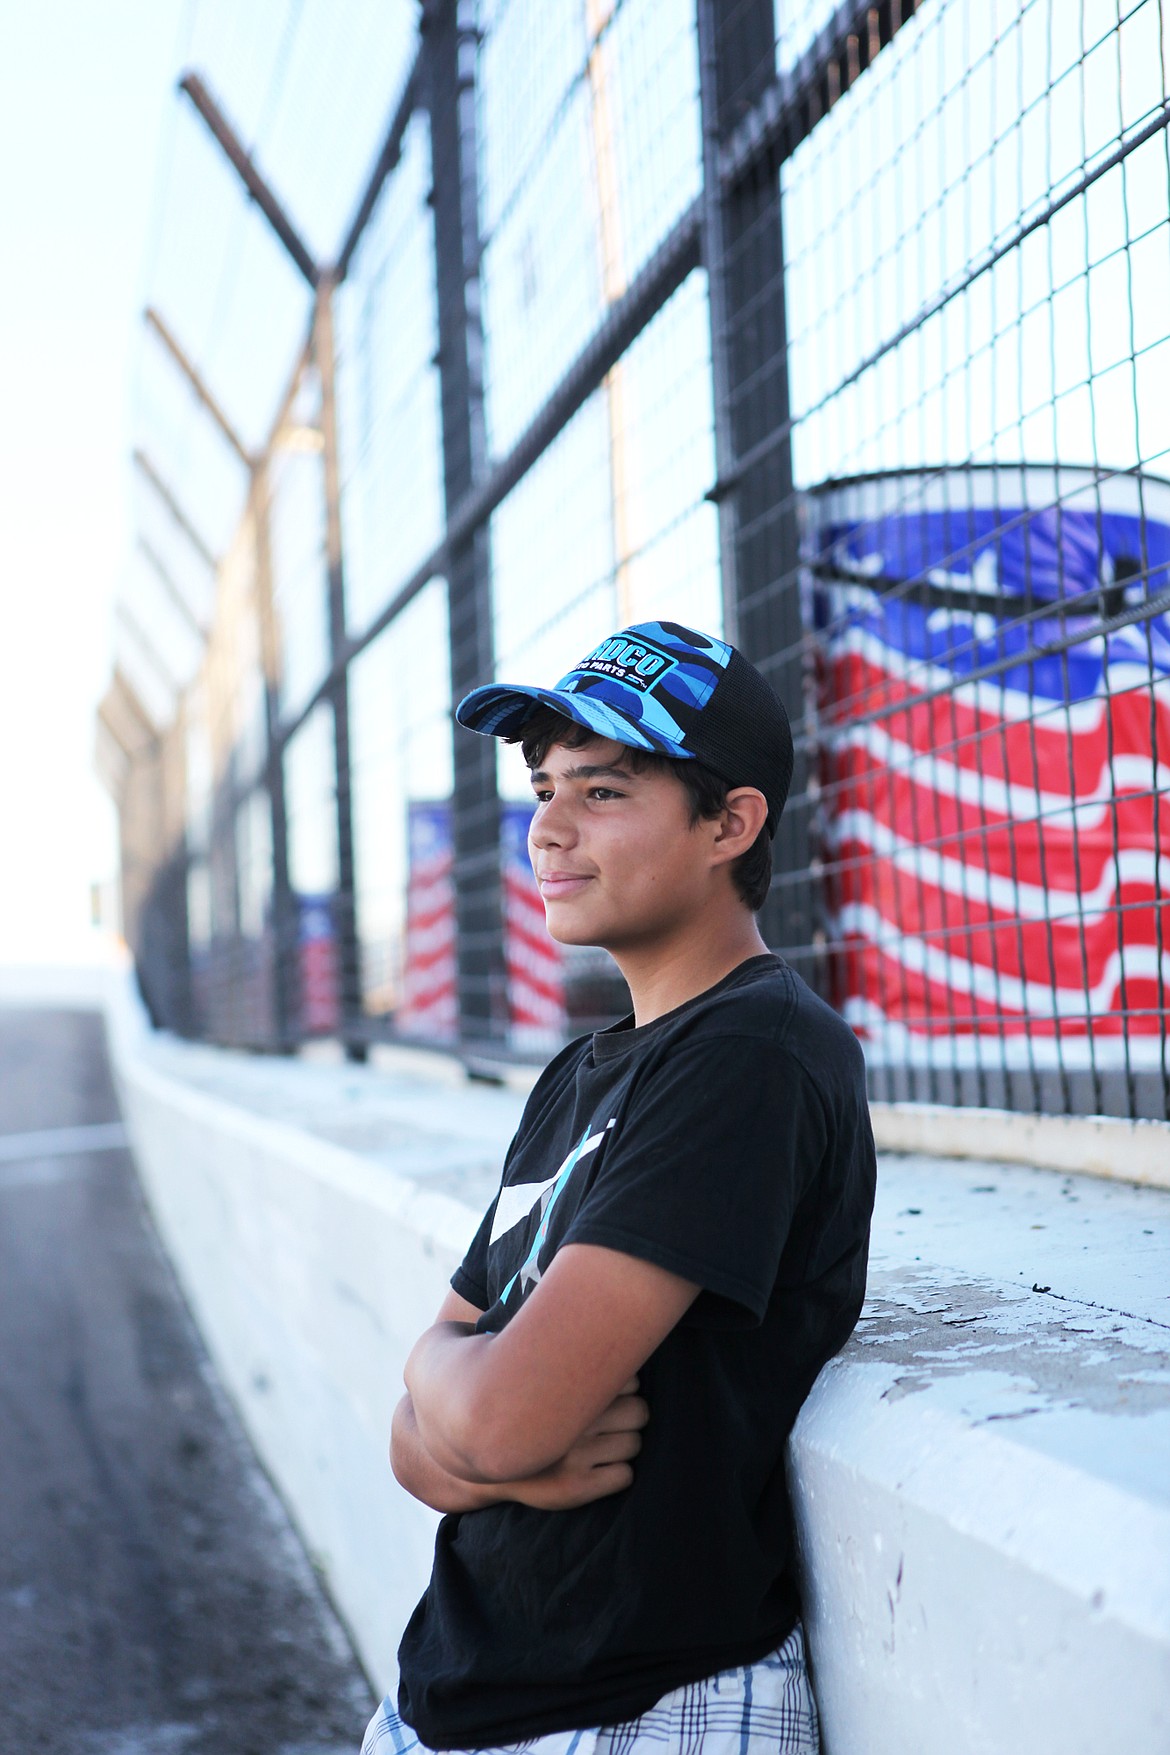 Dustin Mitchell, 14, looks out over the track at Montana Raceway Park in Kalispell. He was diagnosed with Type 1 diabetes as a 9-year-old, but hasn't let his condition stop him. (Mackenzie Reiss/Daily Inter Lake)